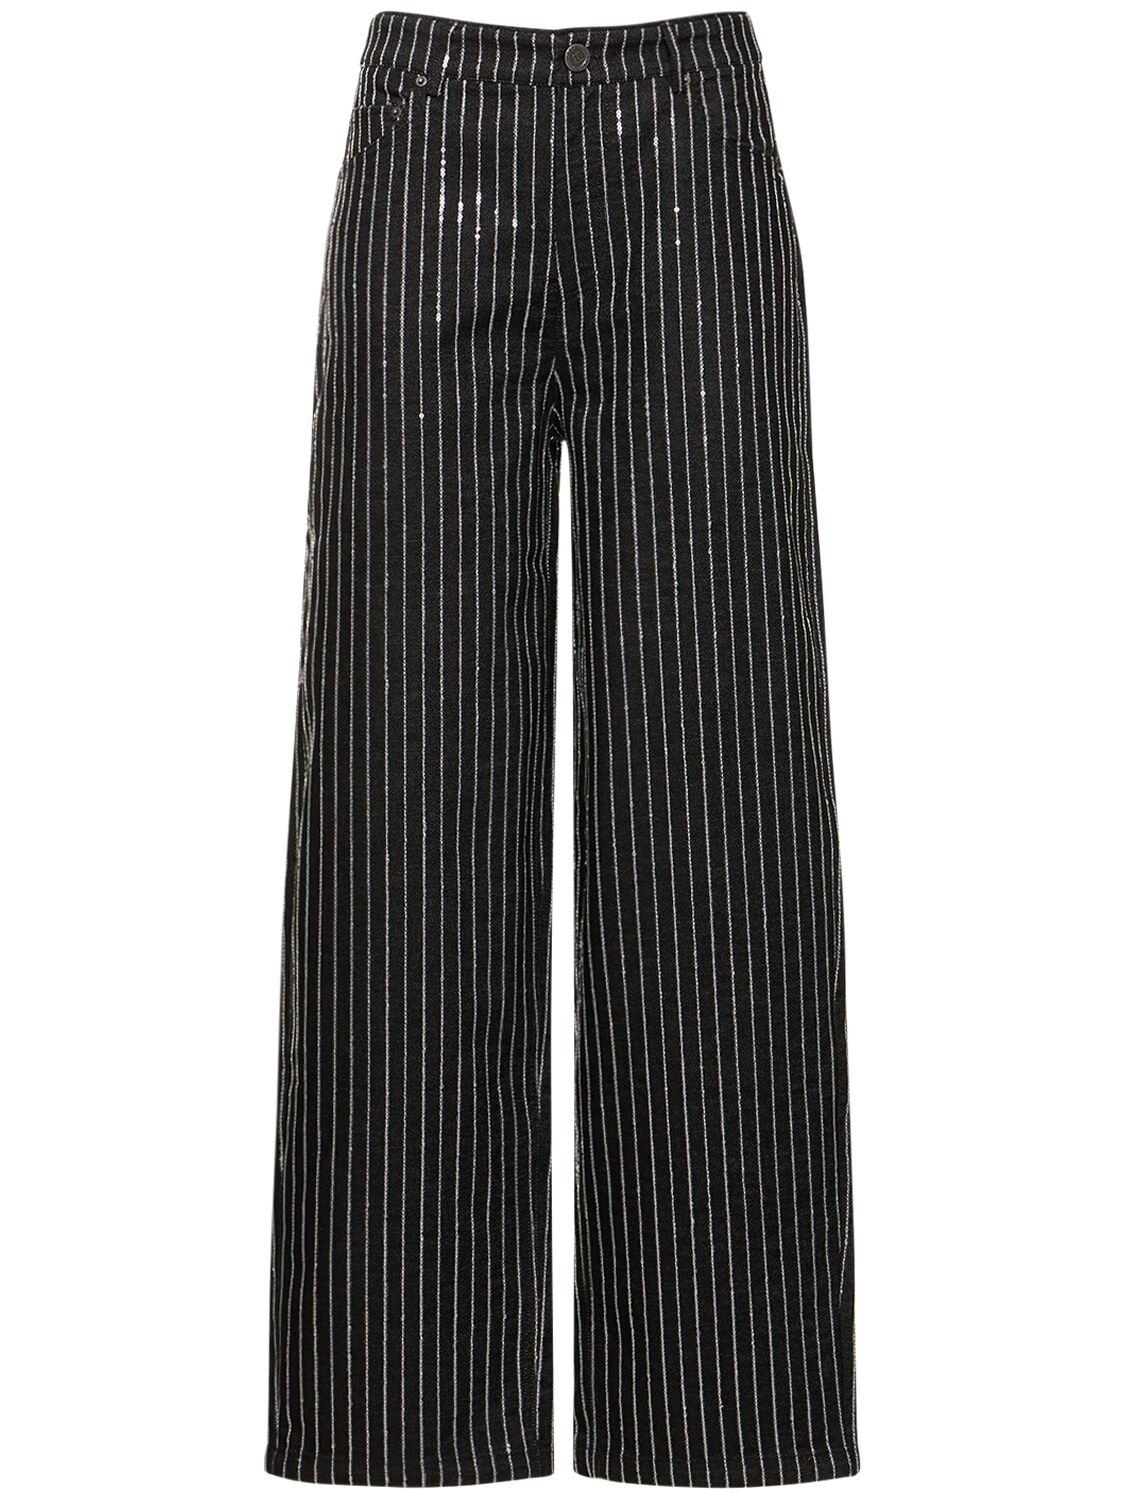 Sequined Cotton Twill Wide Pants